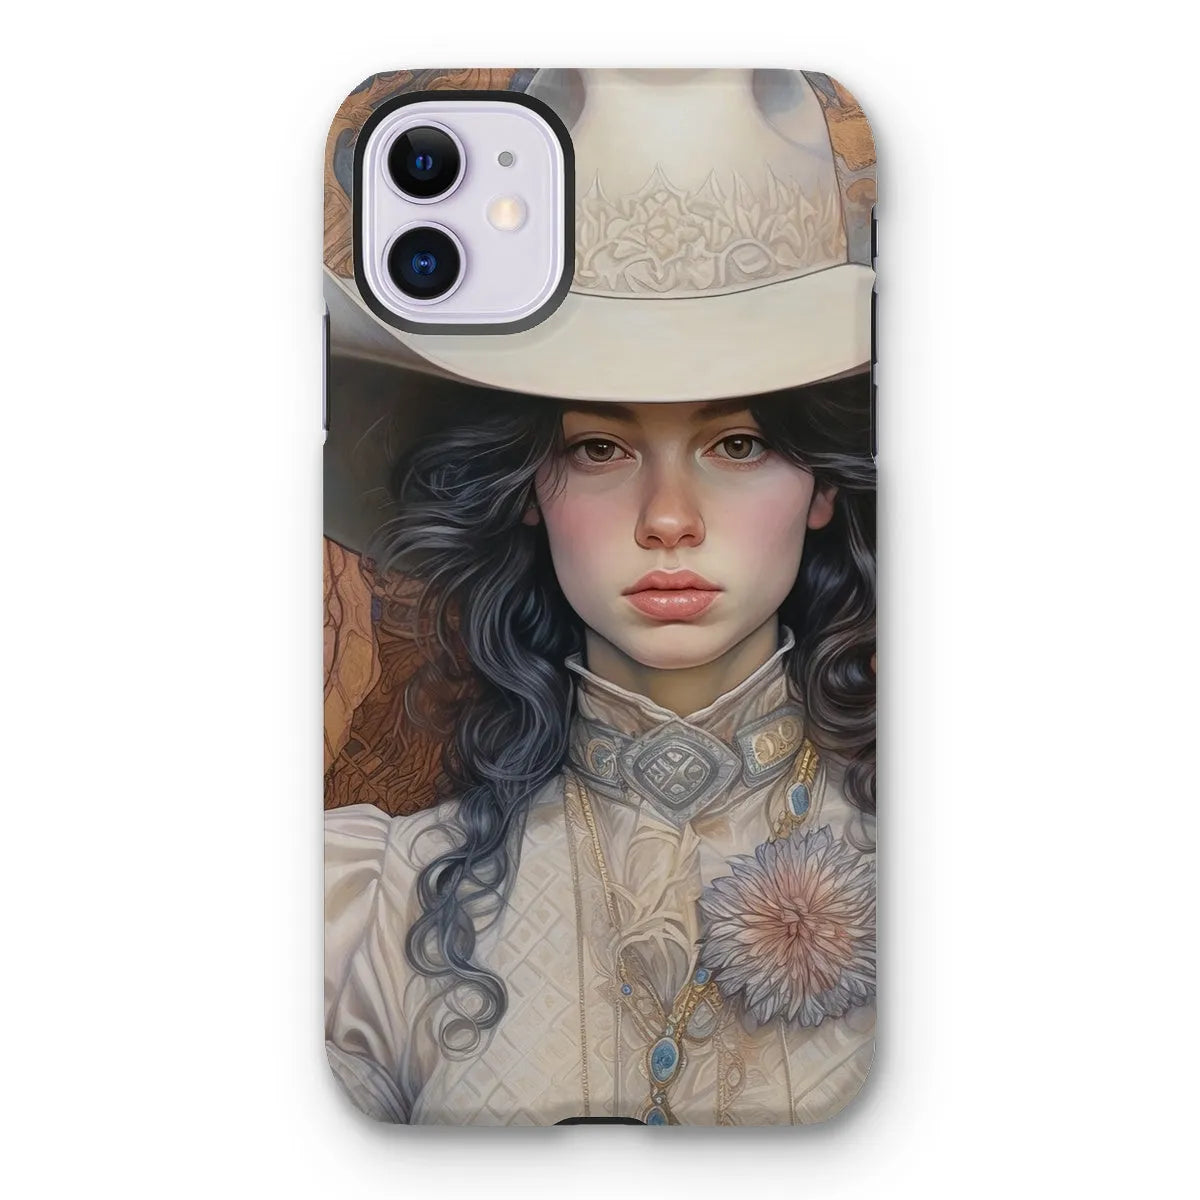 Helena The Lesbian Cowgirl - Sapphic Art Phone Case - Iphone 11 / Matte - Mobile Phone Cases - Aesthetic Art